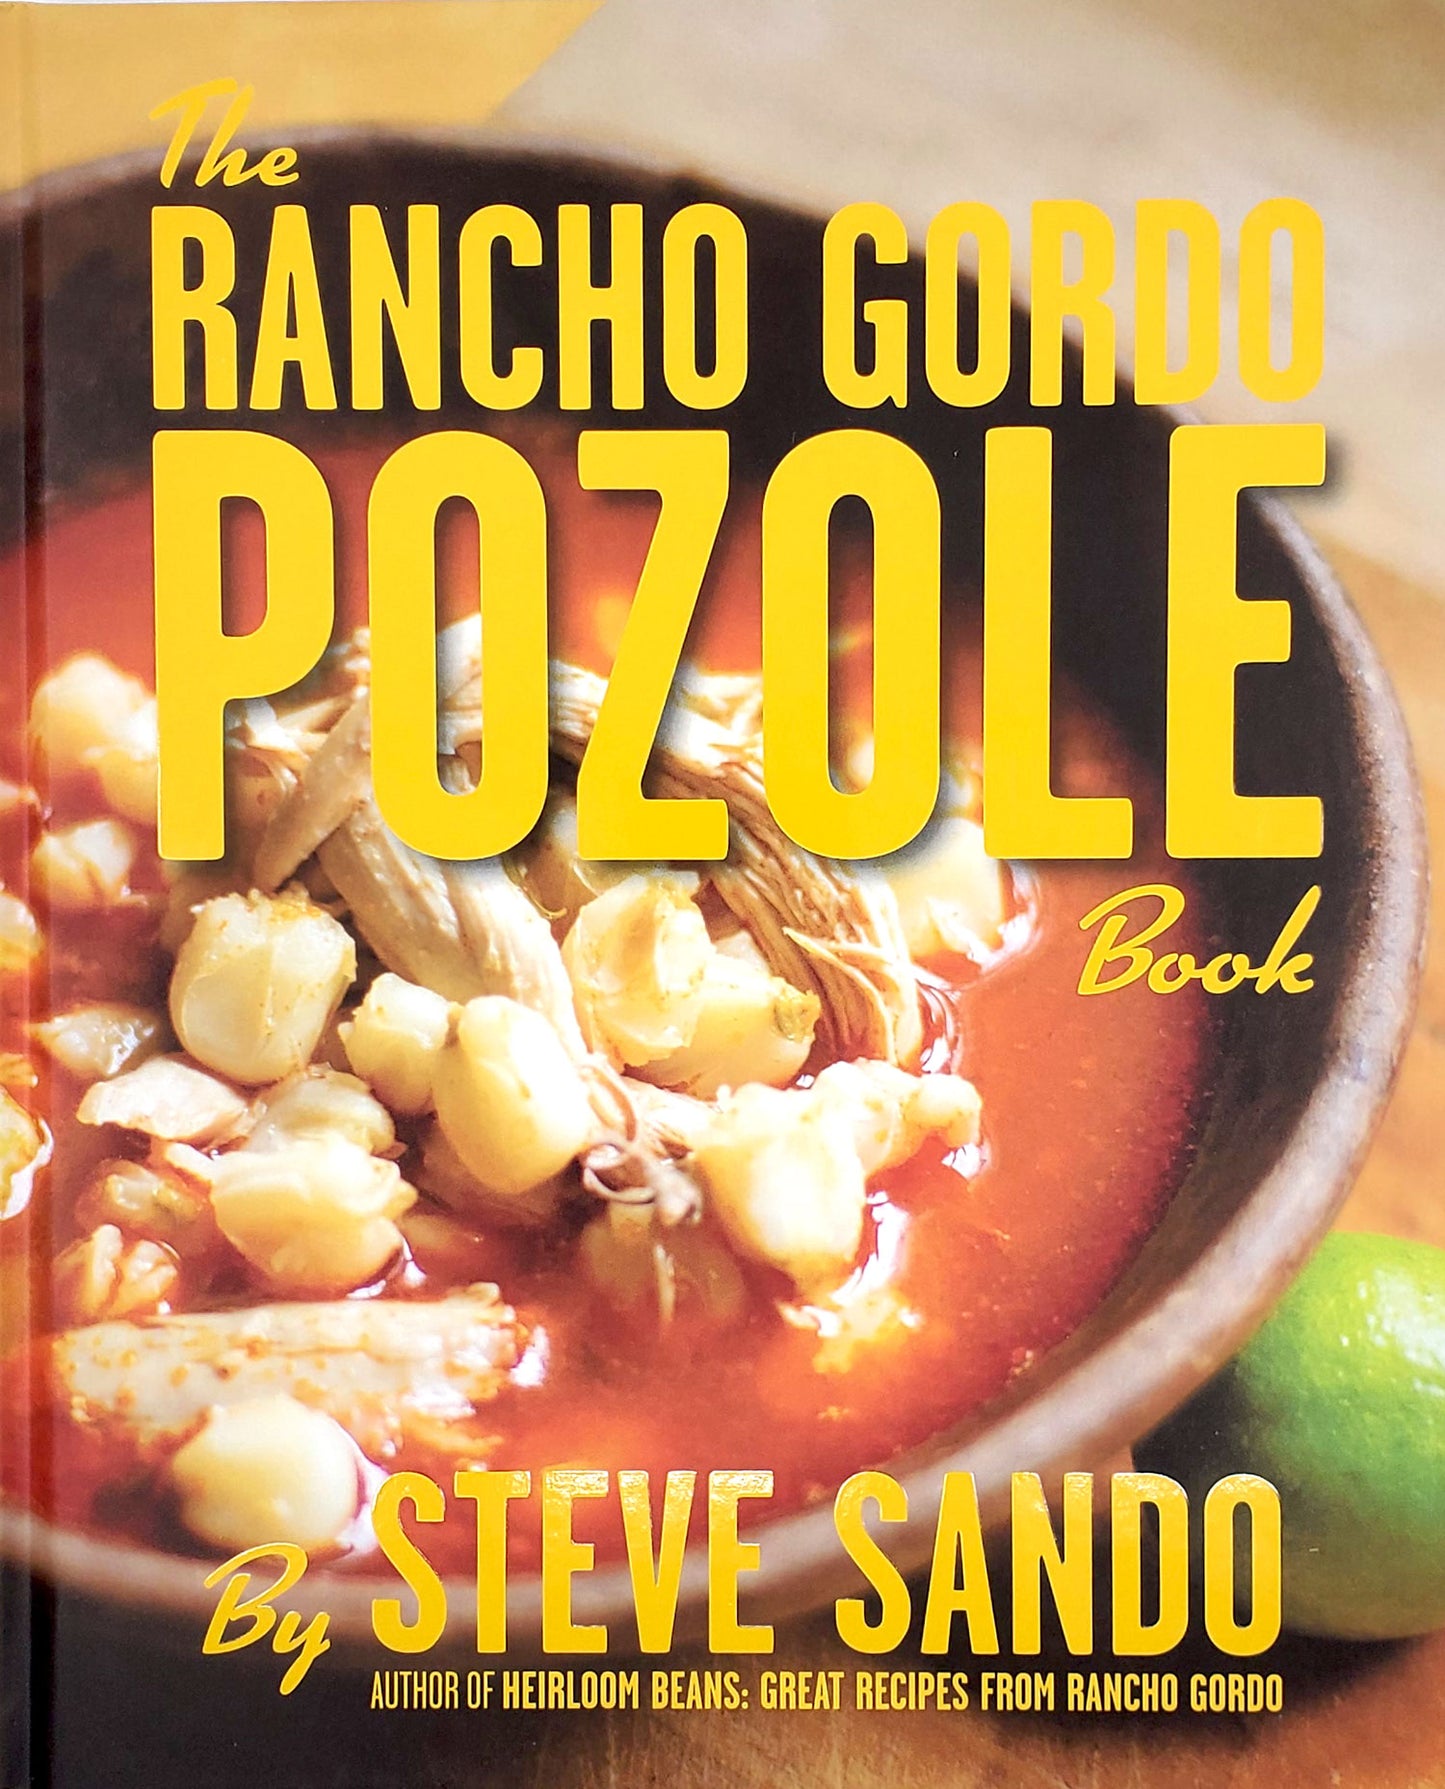 Load image into Gallery viewer, The Rancho Gordo Pozole Book
